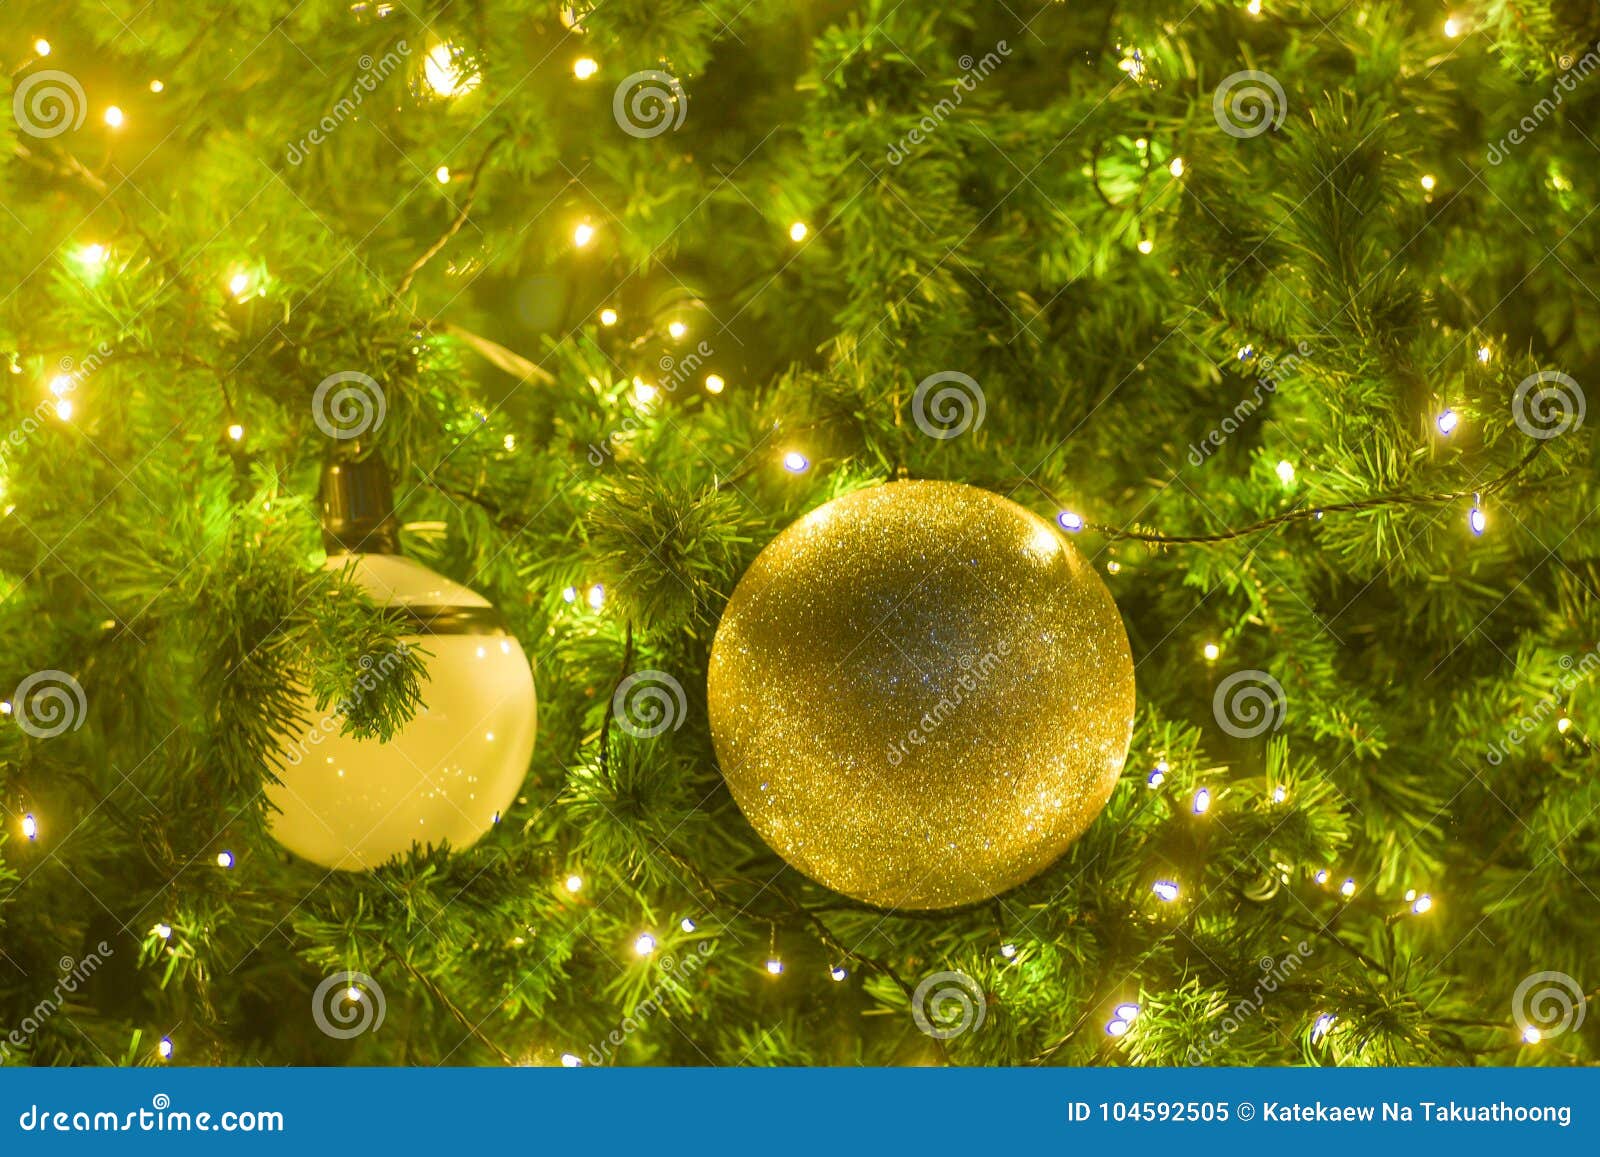 Sparkle Ball on Christmas Tree Stock Image - Image of golden, merry ...